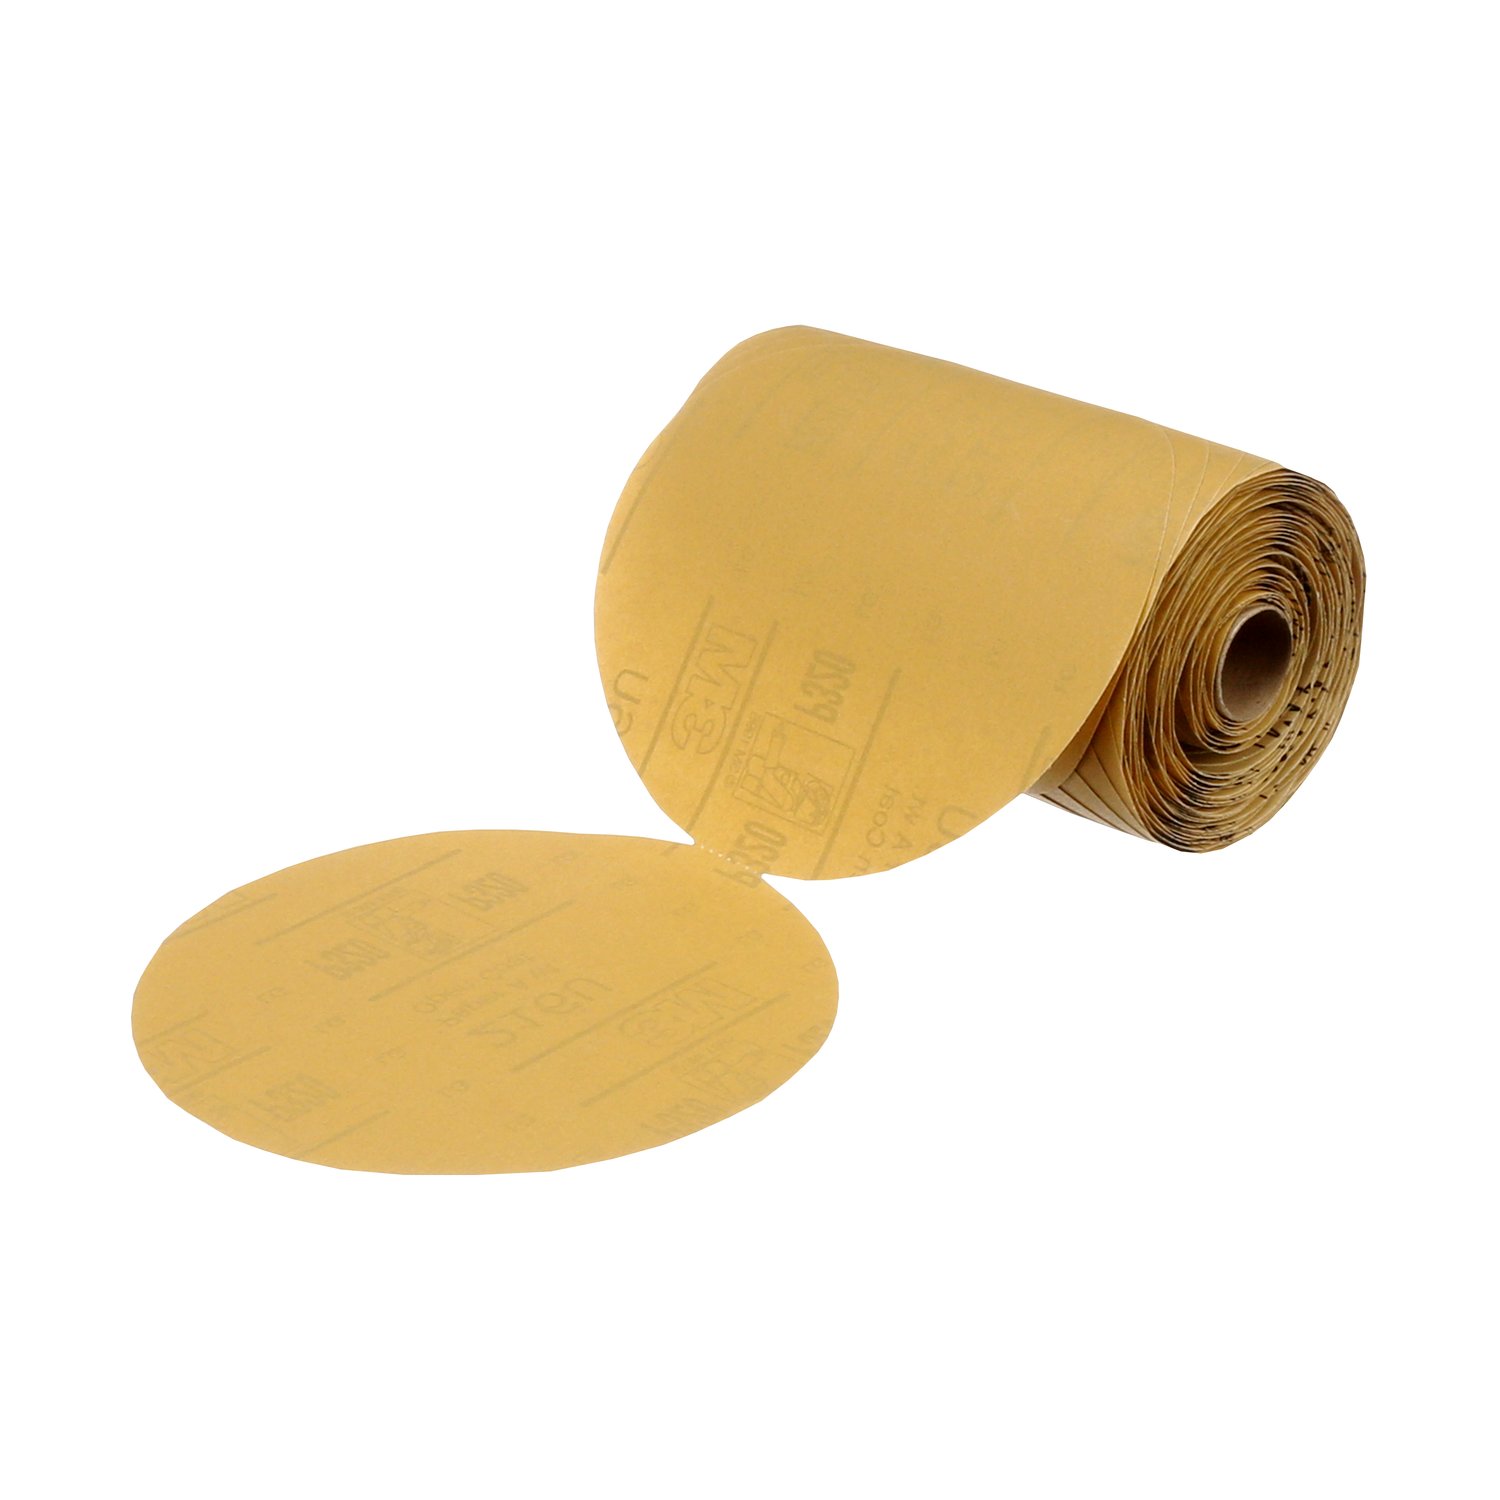 7100109512 - 3M Stikit Gold Paper Disc Roll 216U, P400 A-weight, Config